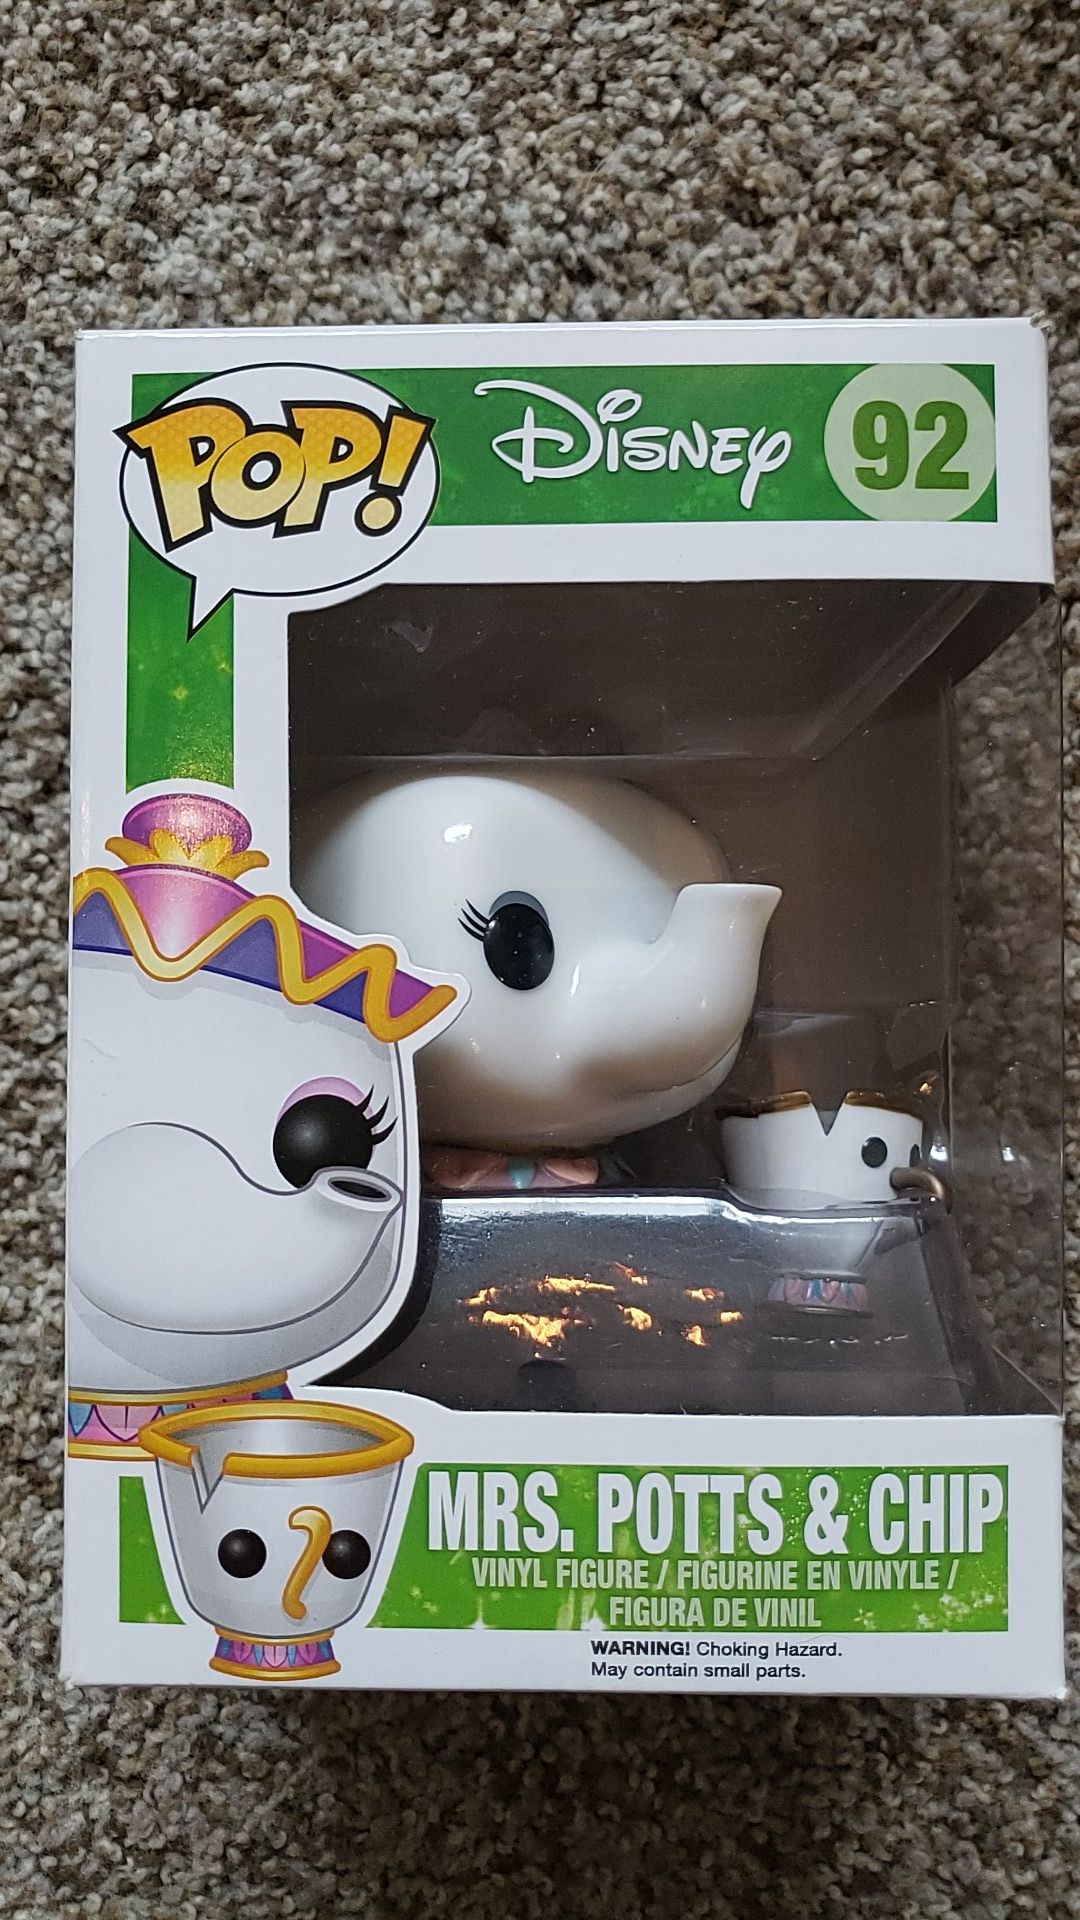 Mrs. Potts and chip Vaulted funko pop